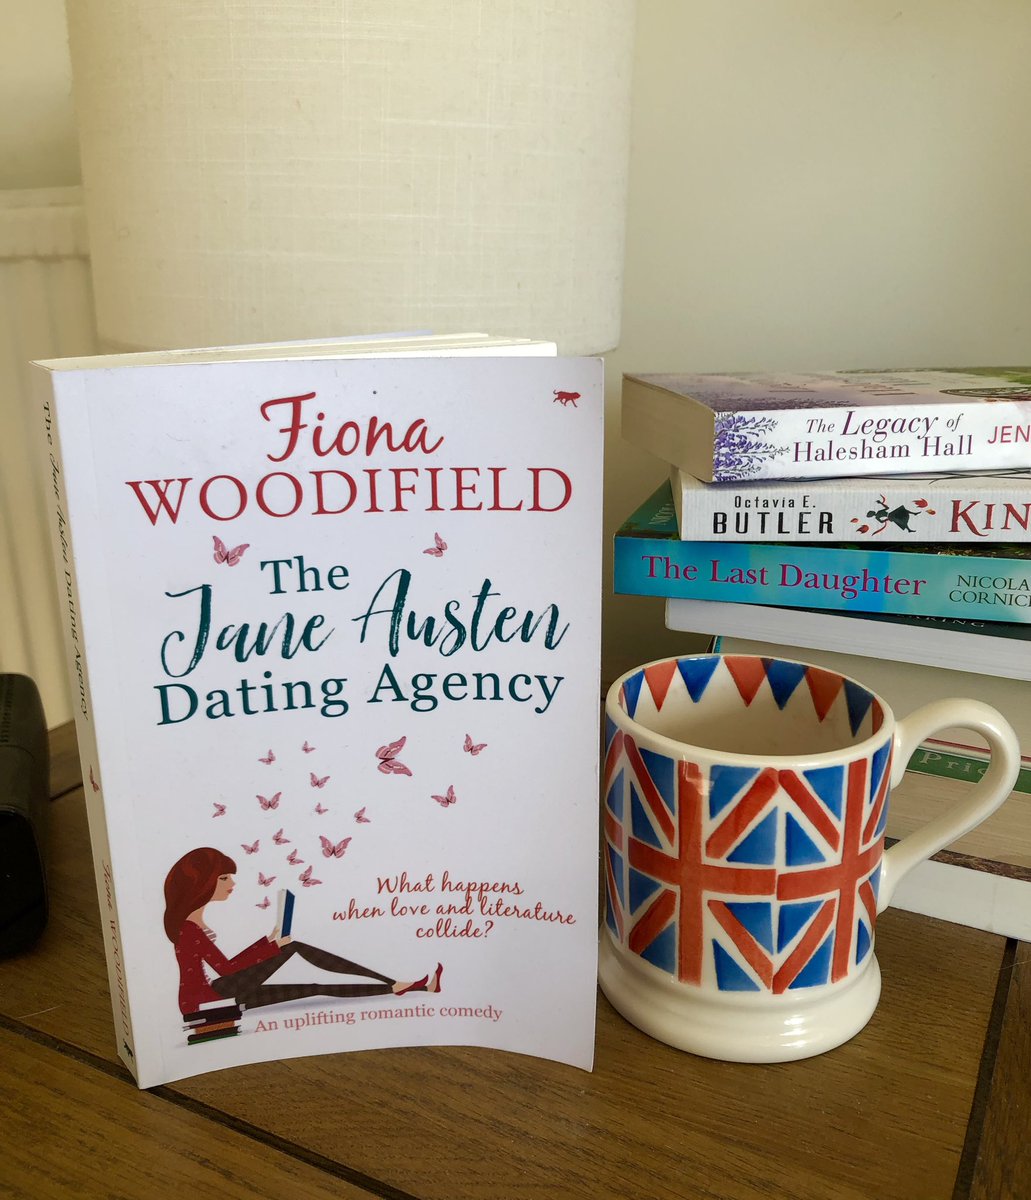 Book at the bedside. Had great fun spotting all the #janeausten references! @FionaWoodifield @Bloodhoundbook #romcom #weekendreads #booktwt #BookTwitter @EmmaBridgewater